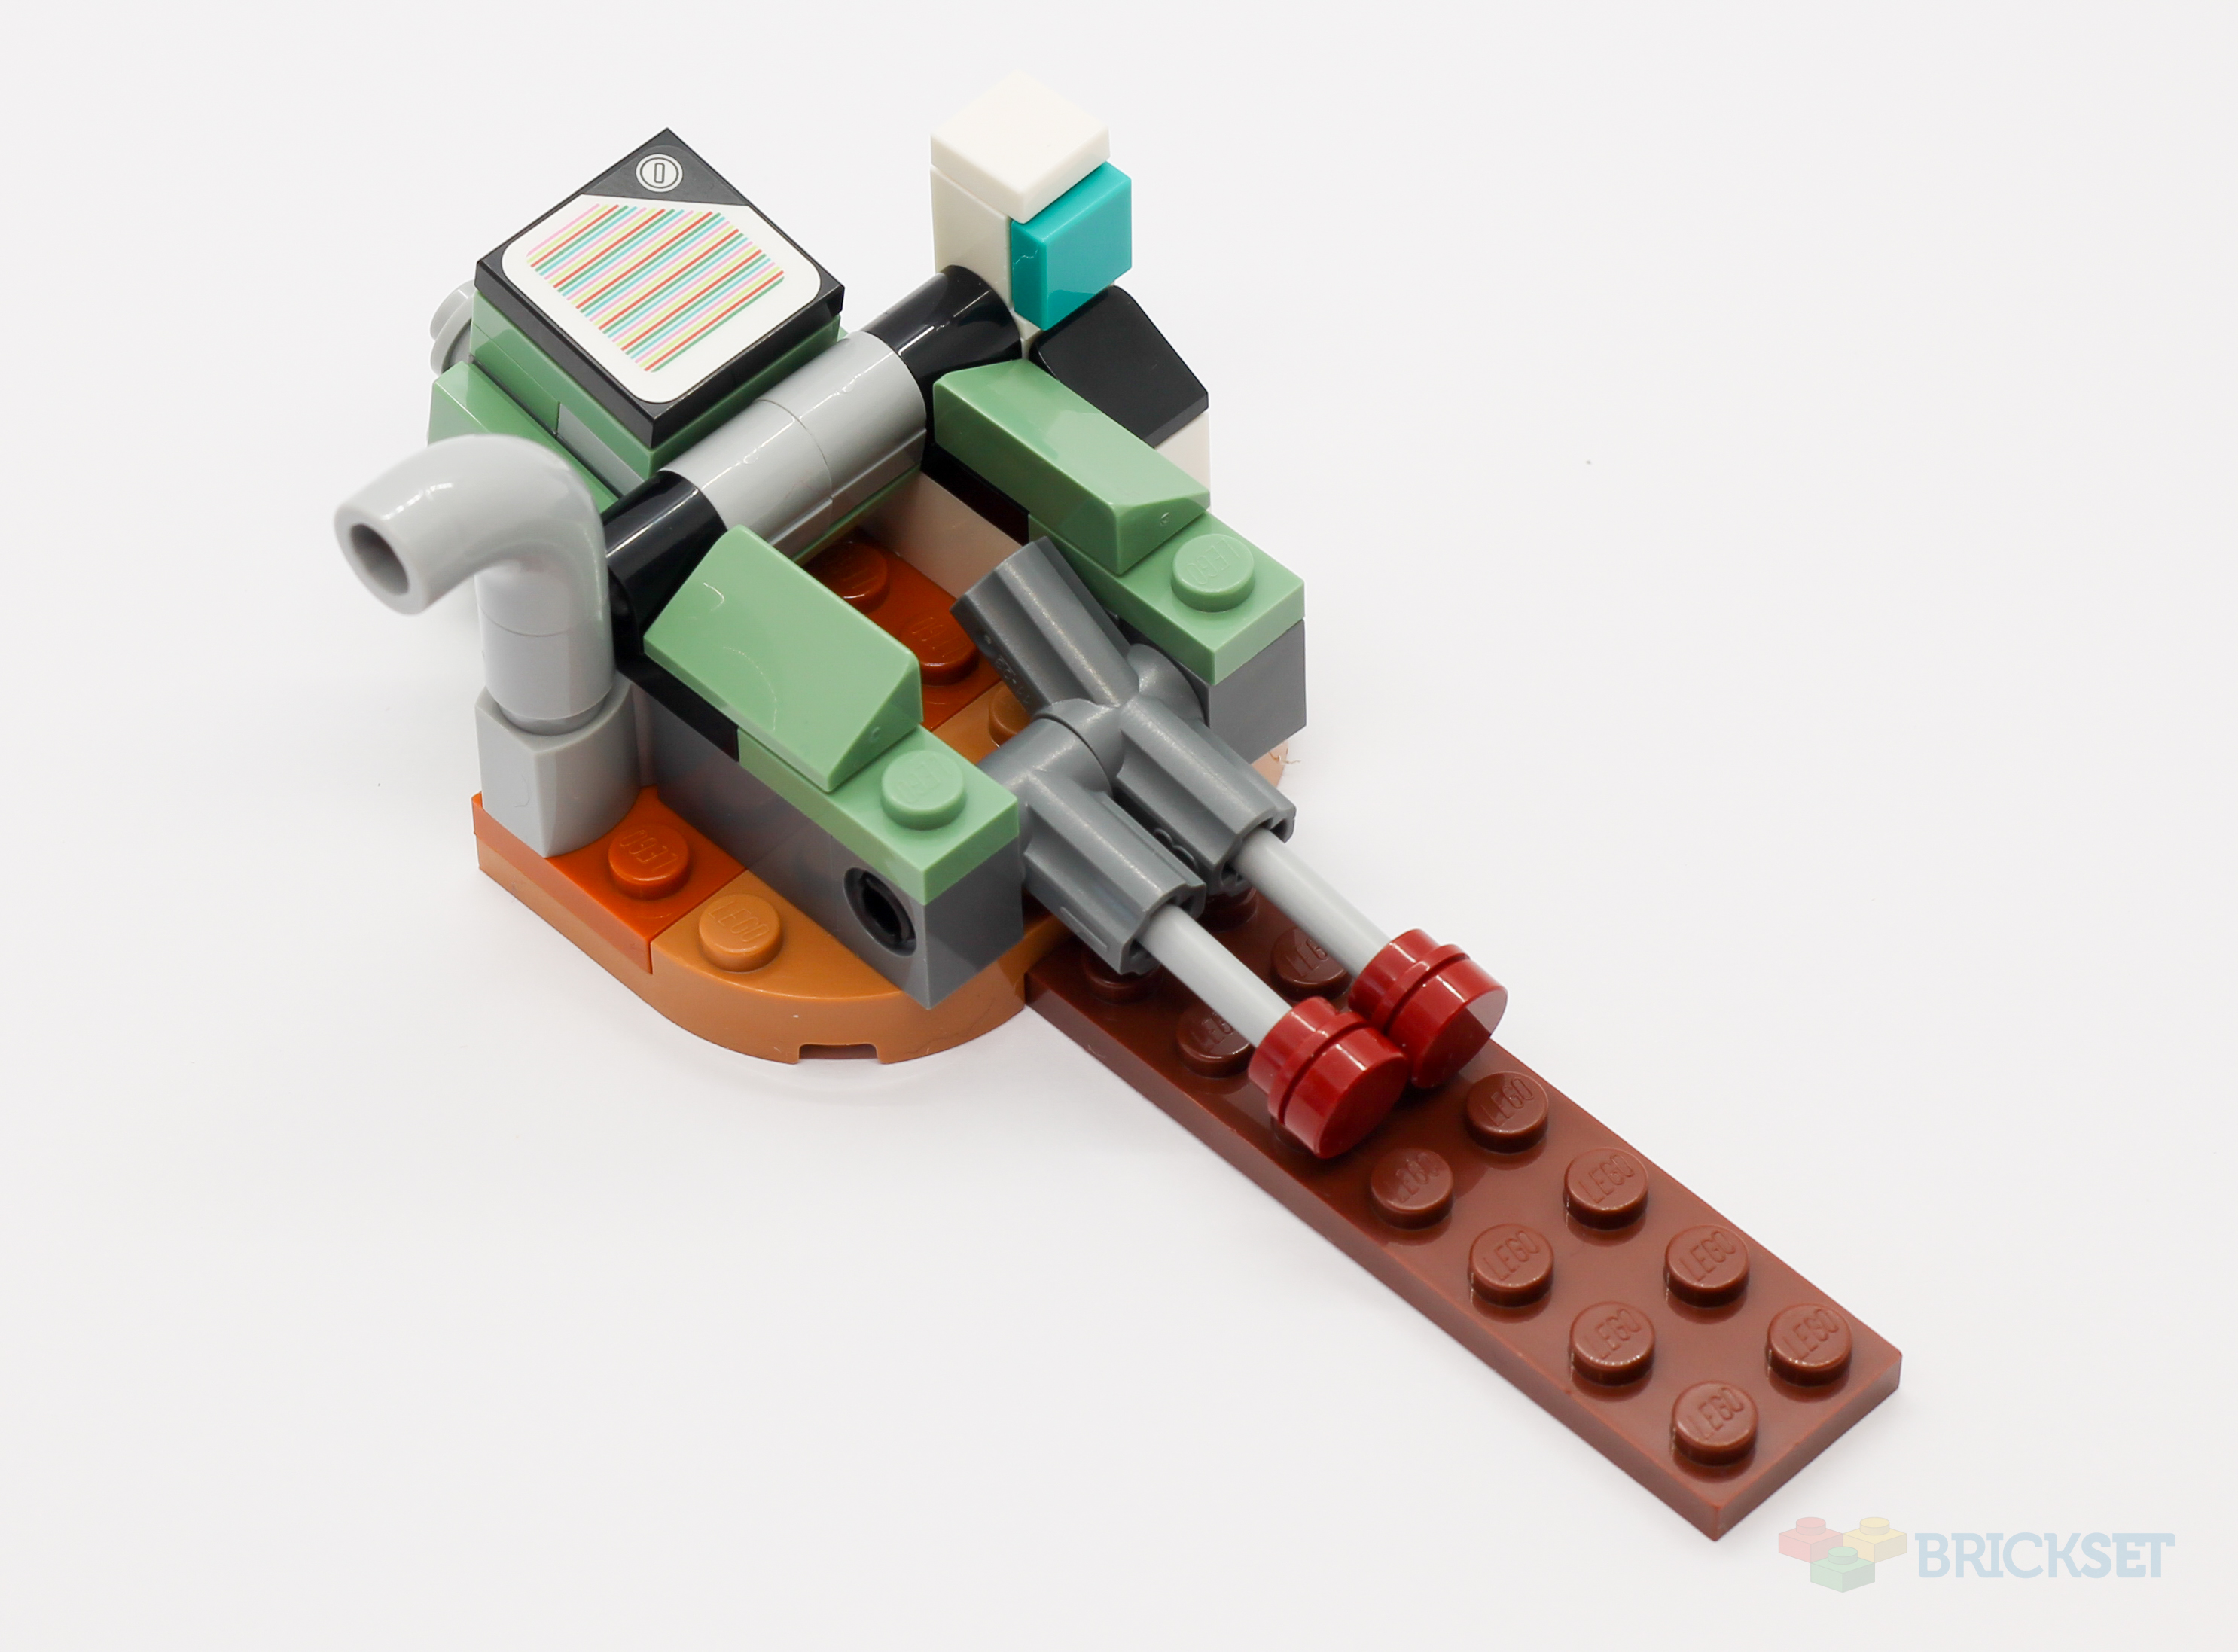 LEGO 71397 Luigi's Mansion Lab and Poltergust review